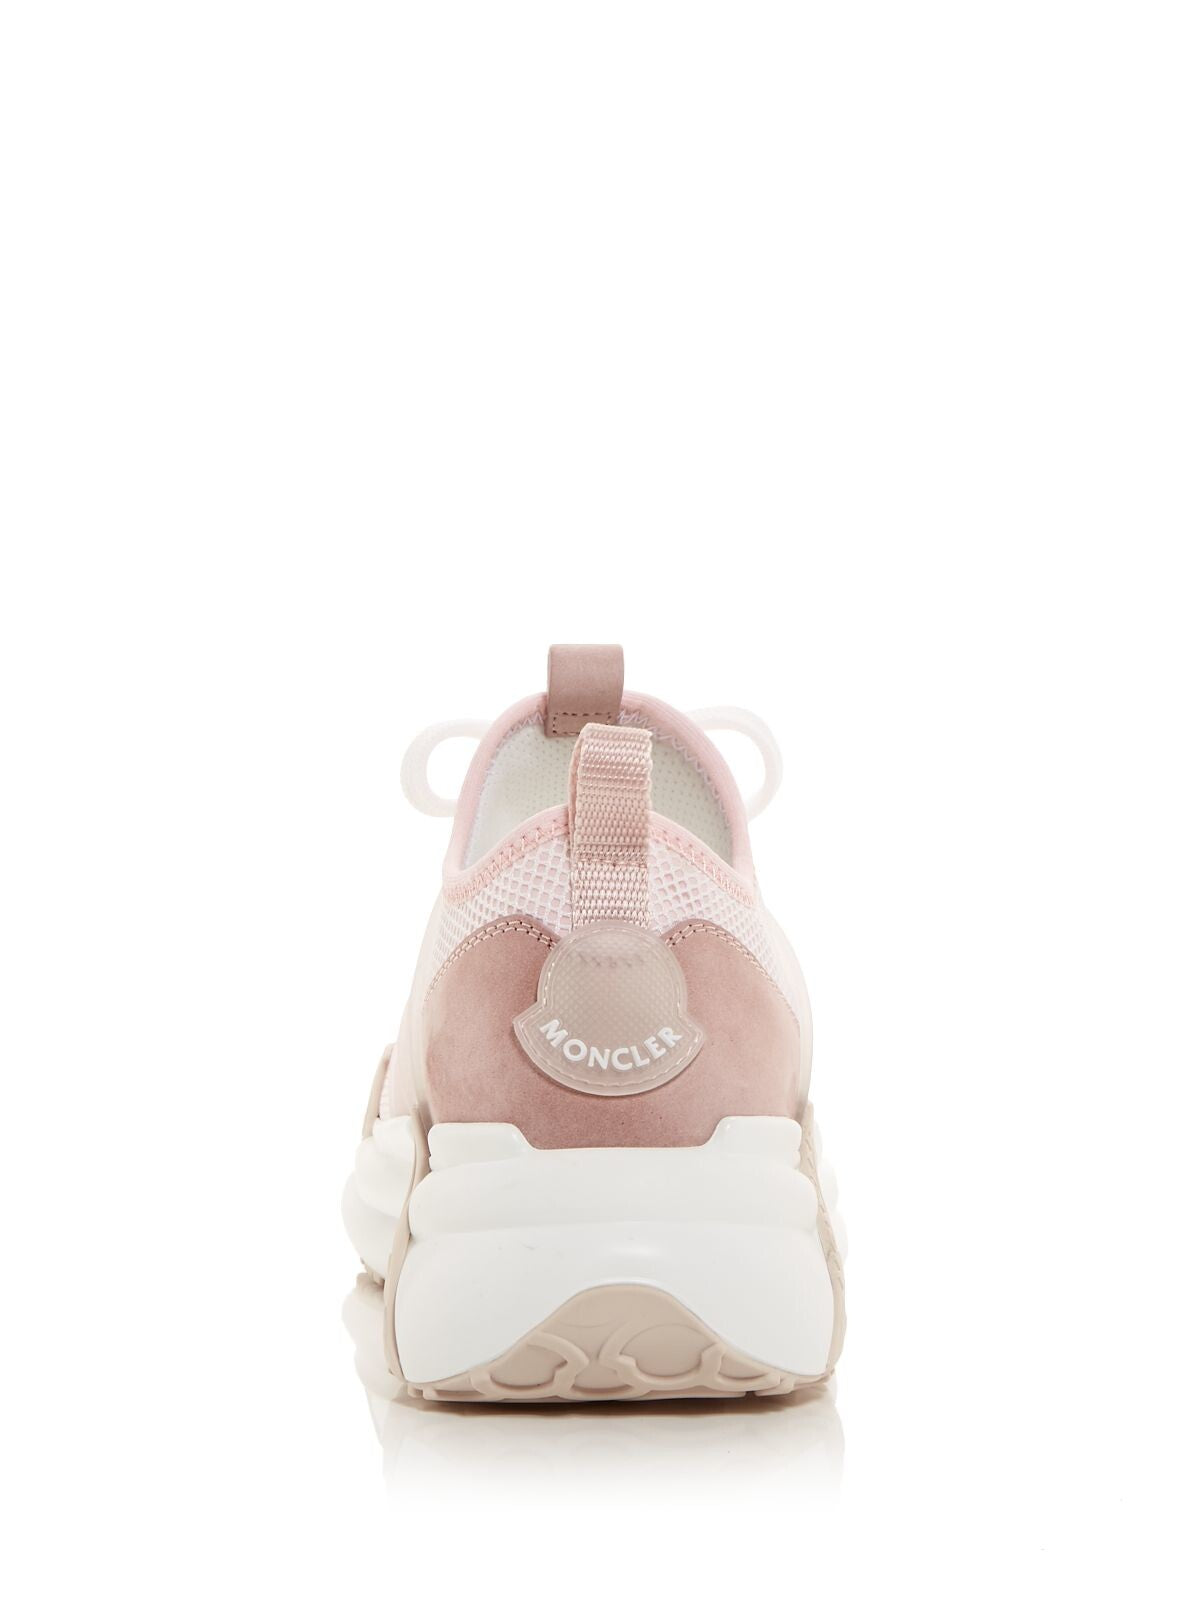 MONCLER Womens Pink Pull Tab Stretch Removable Insole Lunarove Round Toe Wedge Lace-Up Leather Athletic Sneakers 40.5